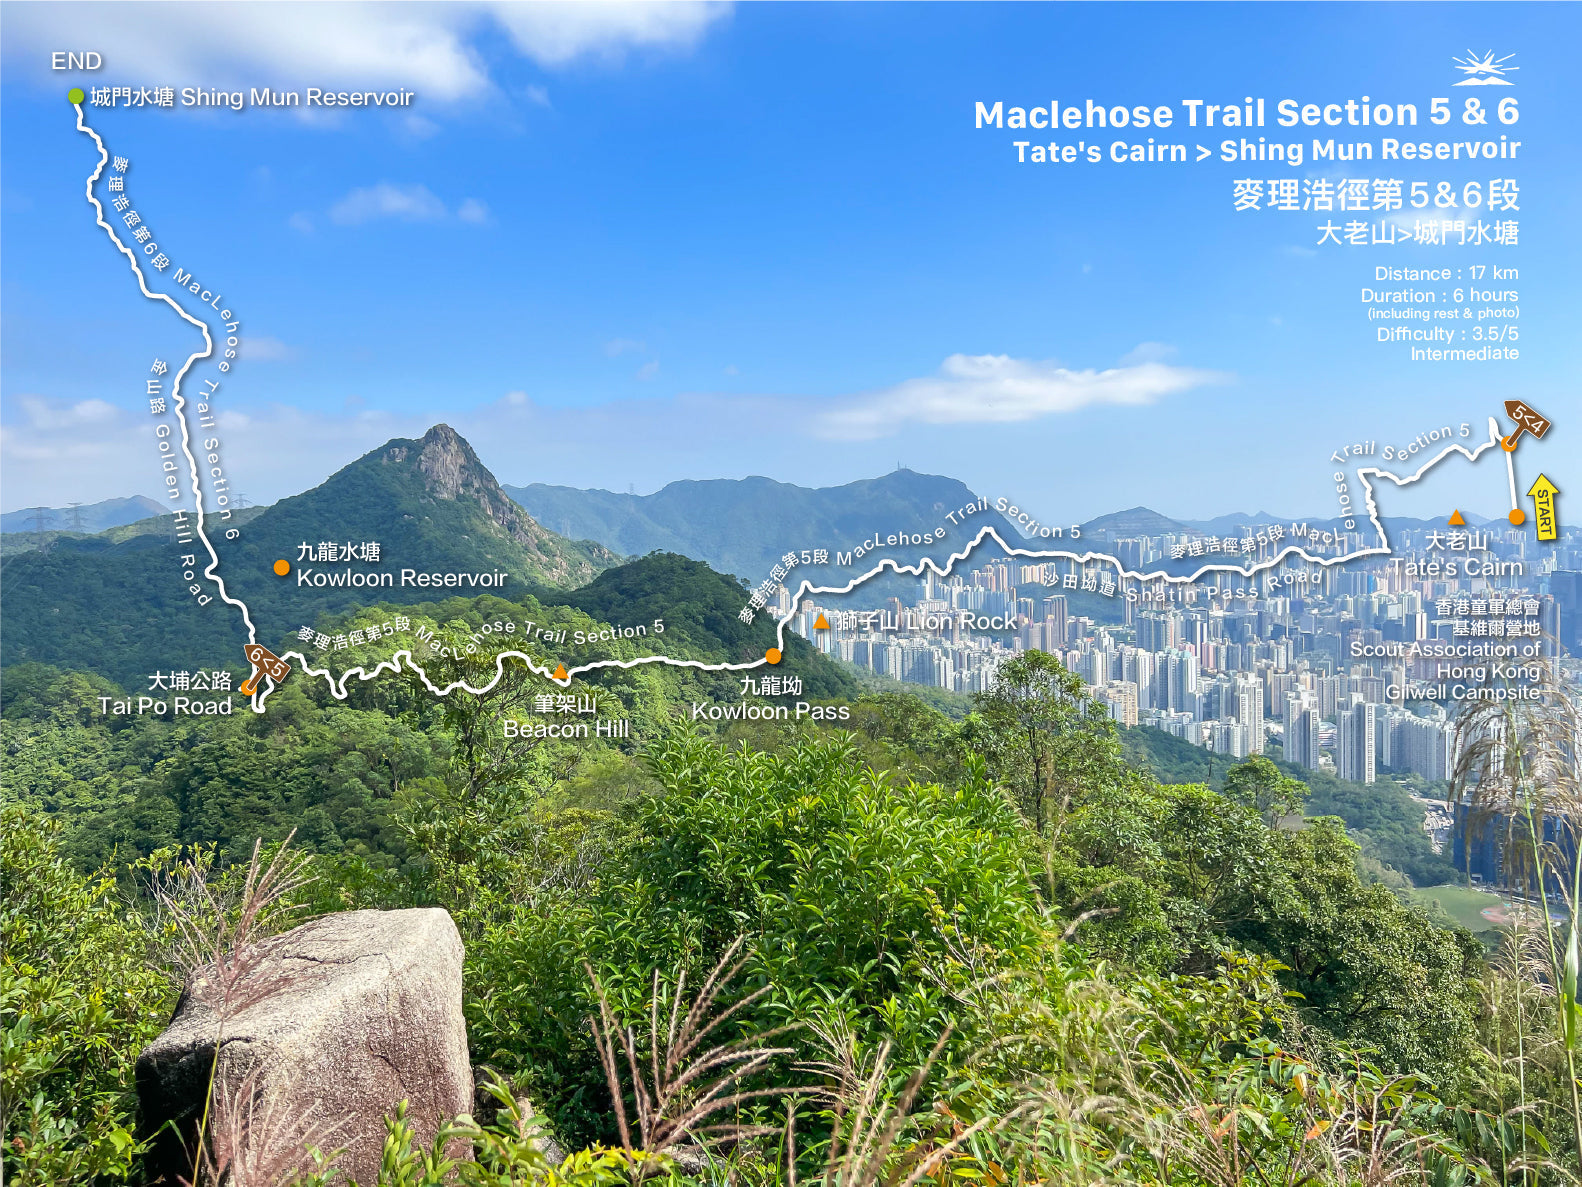 MacLehose Trail Section 5&6 | Tate's Cairn to Shing Mun Reservoir